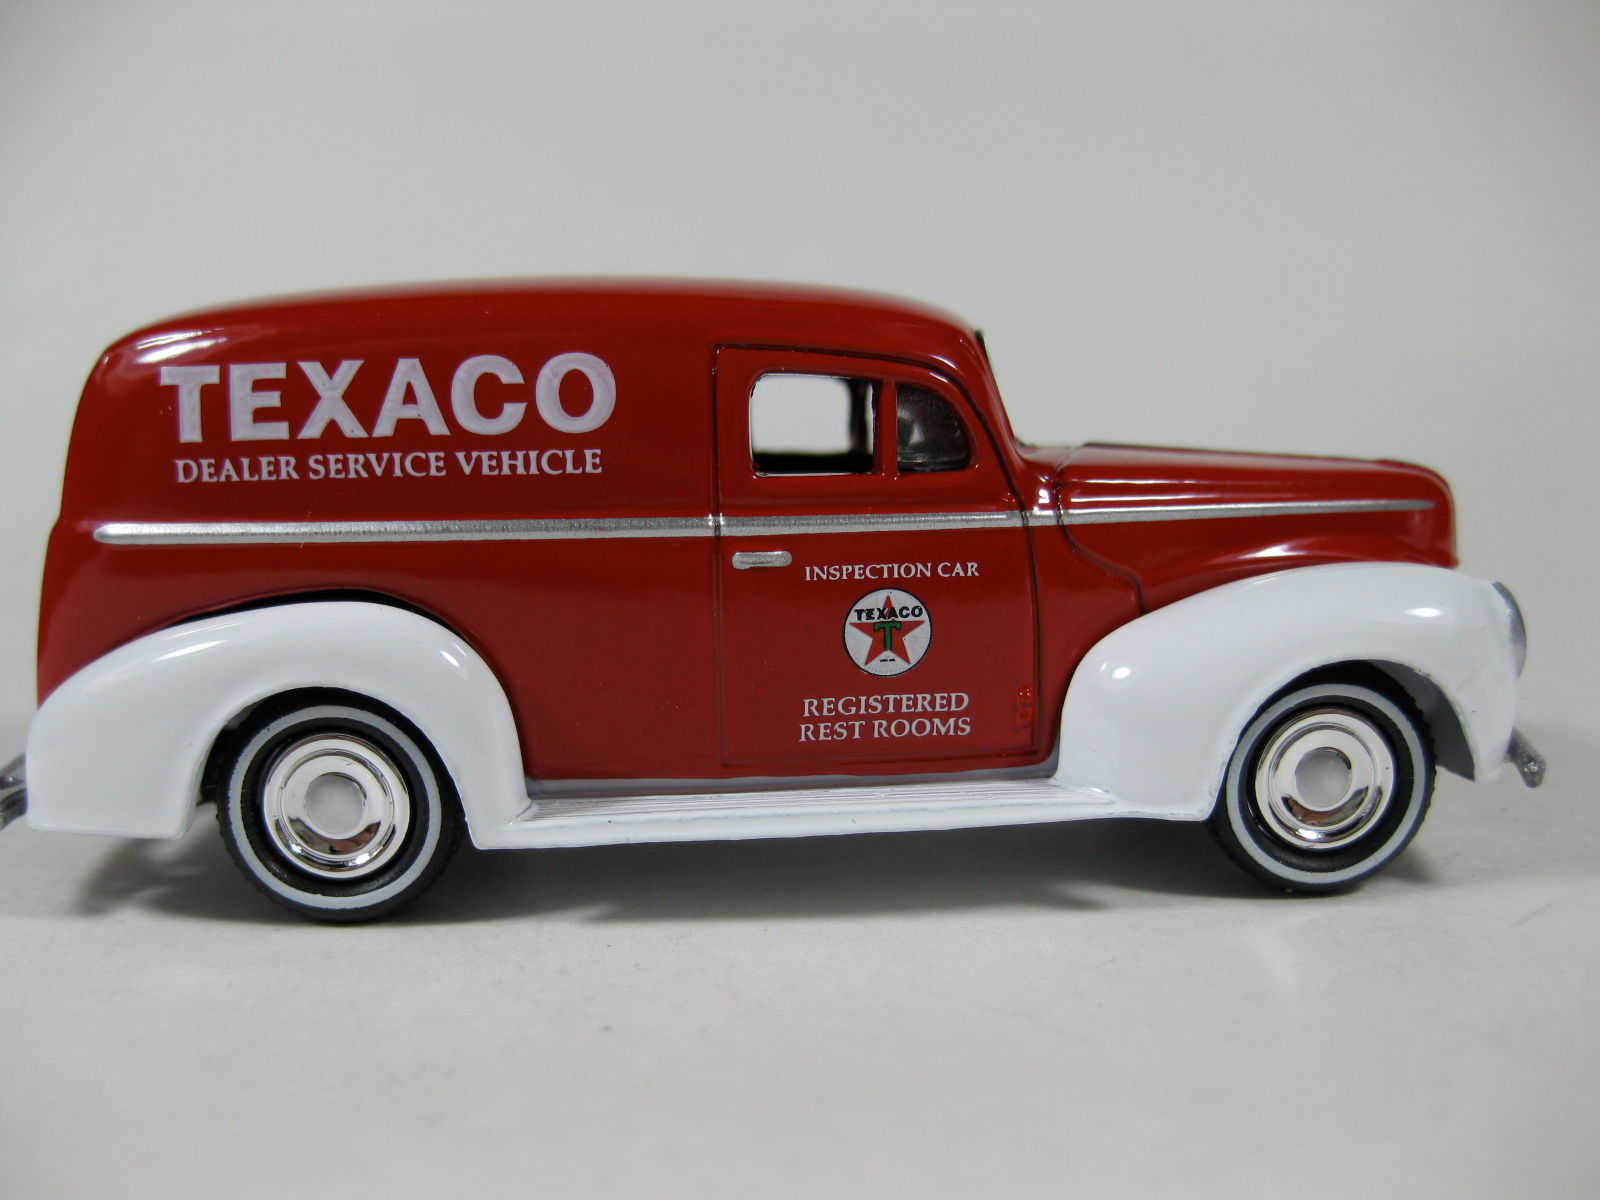 Illustration for article titled The fleet is in...Texaco fleet that is. (pic heavy, as usual)